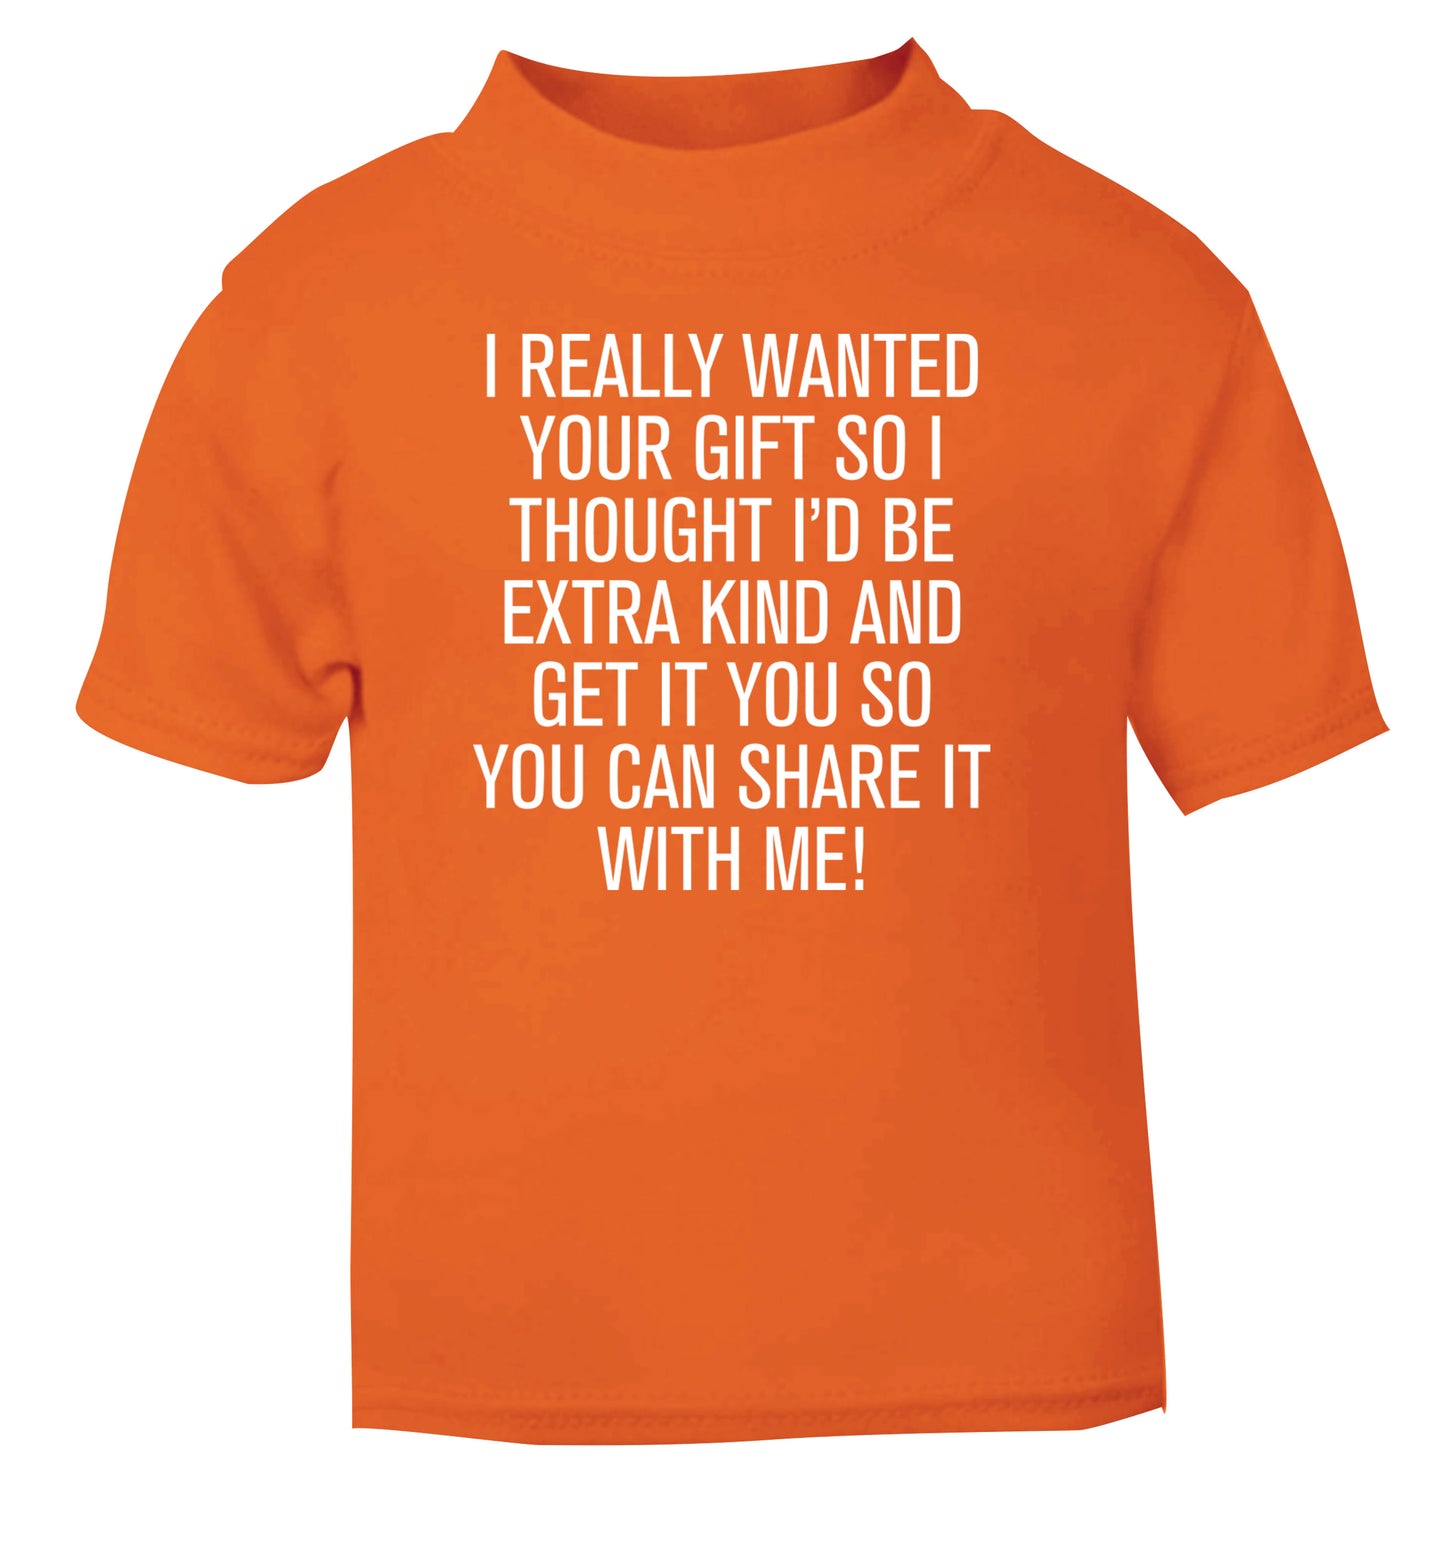 I really wanted your gift orange Baby Toddler Tshirt 2 Years